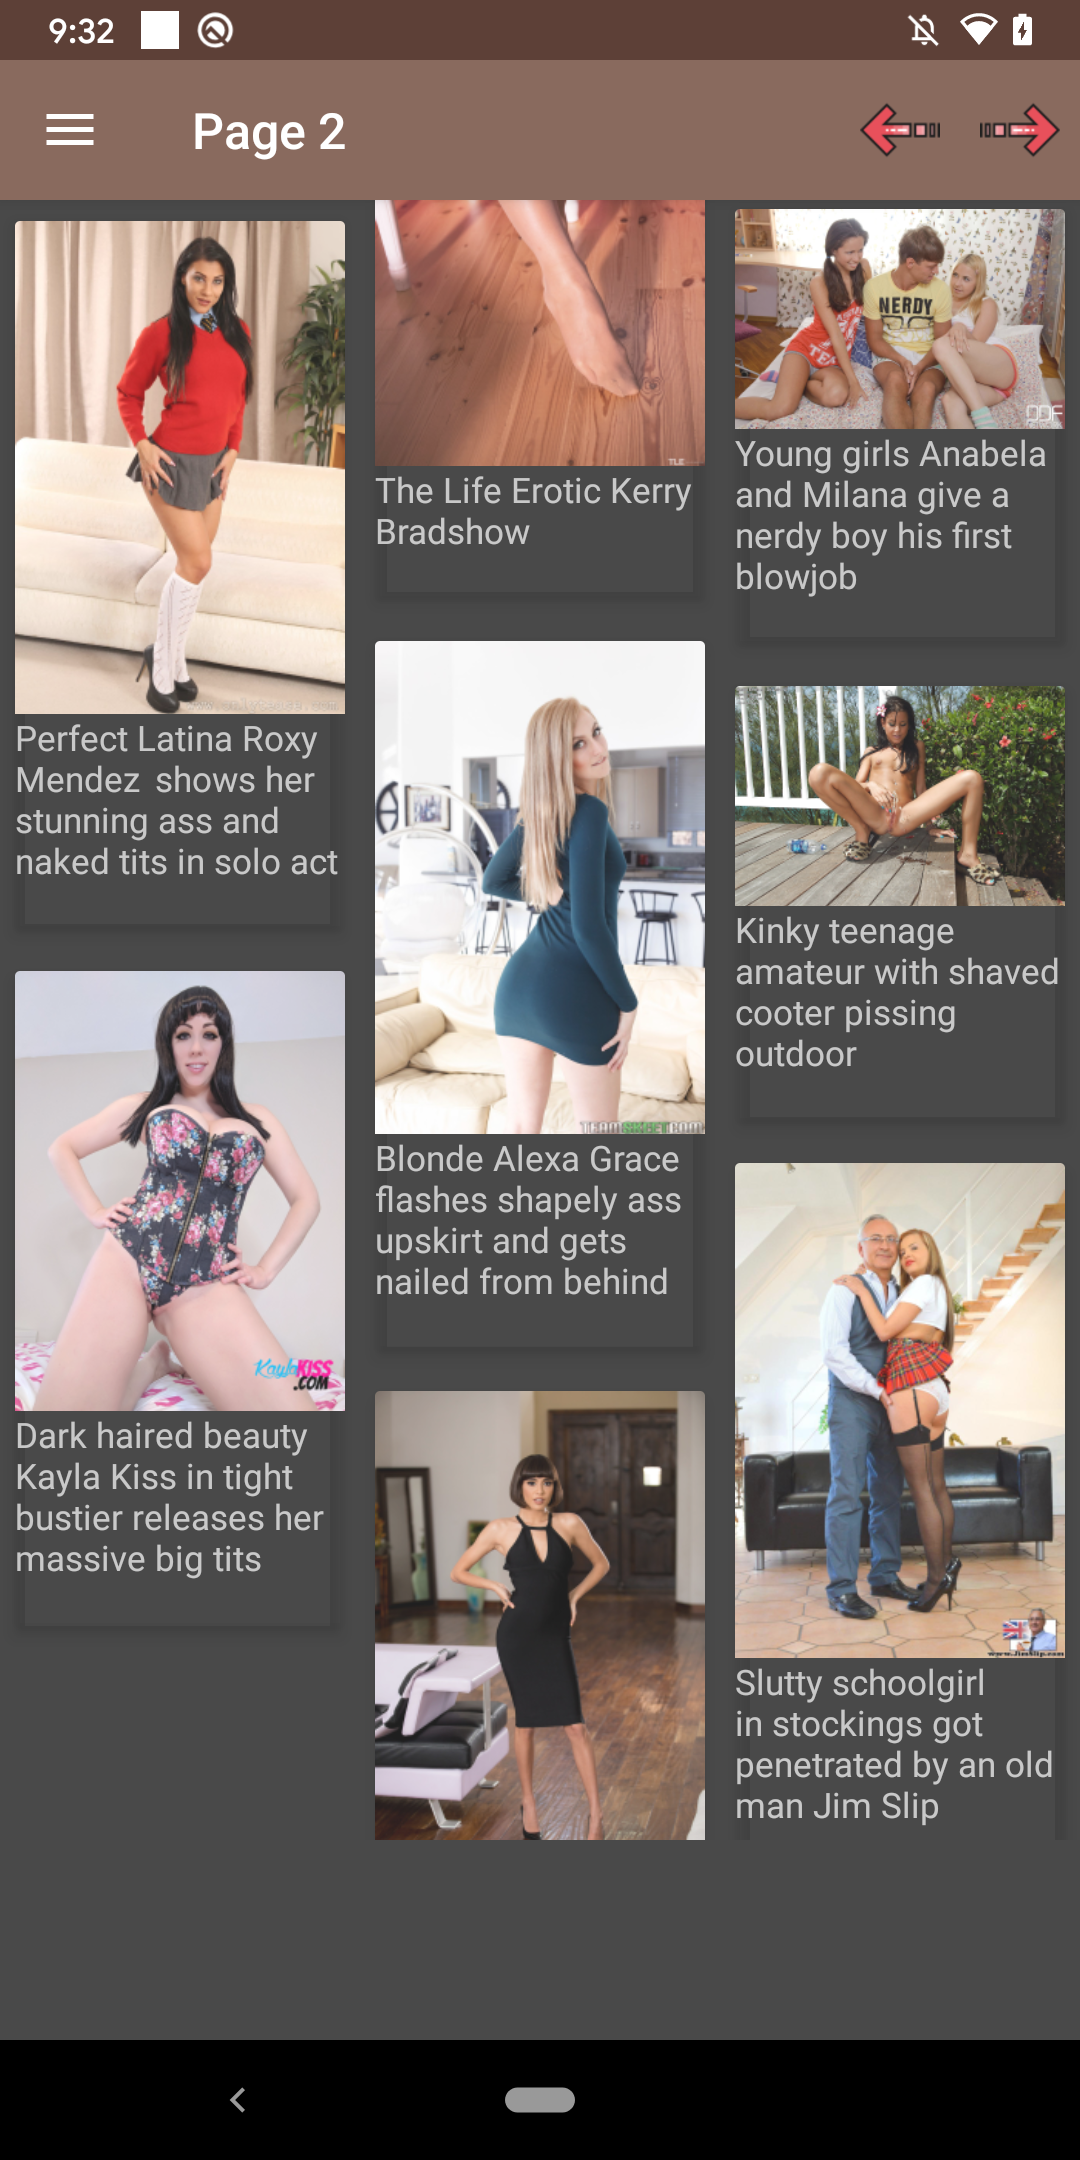 Sexy Teen Galleries photo,pornstar,download,comics,blowbang,galleries,puzzle,app,hentai,android,apps,hentie,gallery,sexy,apk,free,girls,photos,hot,pics,porn,adult,pegging,pornstars